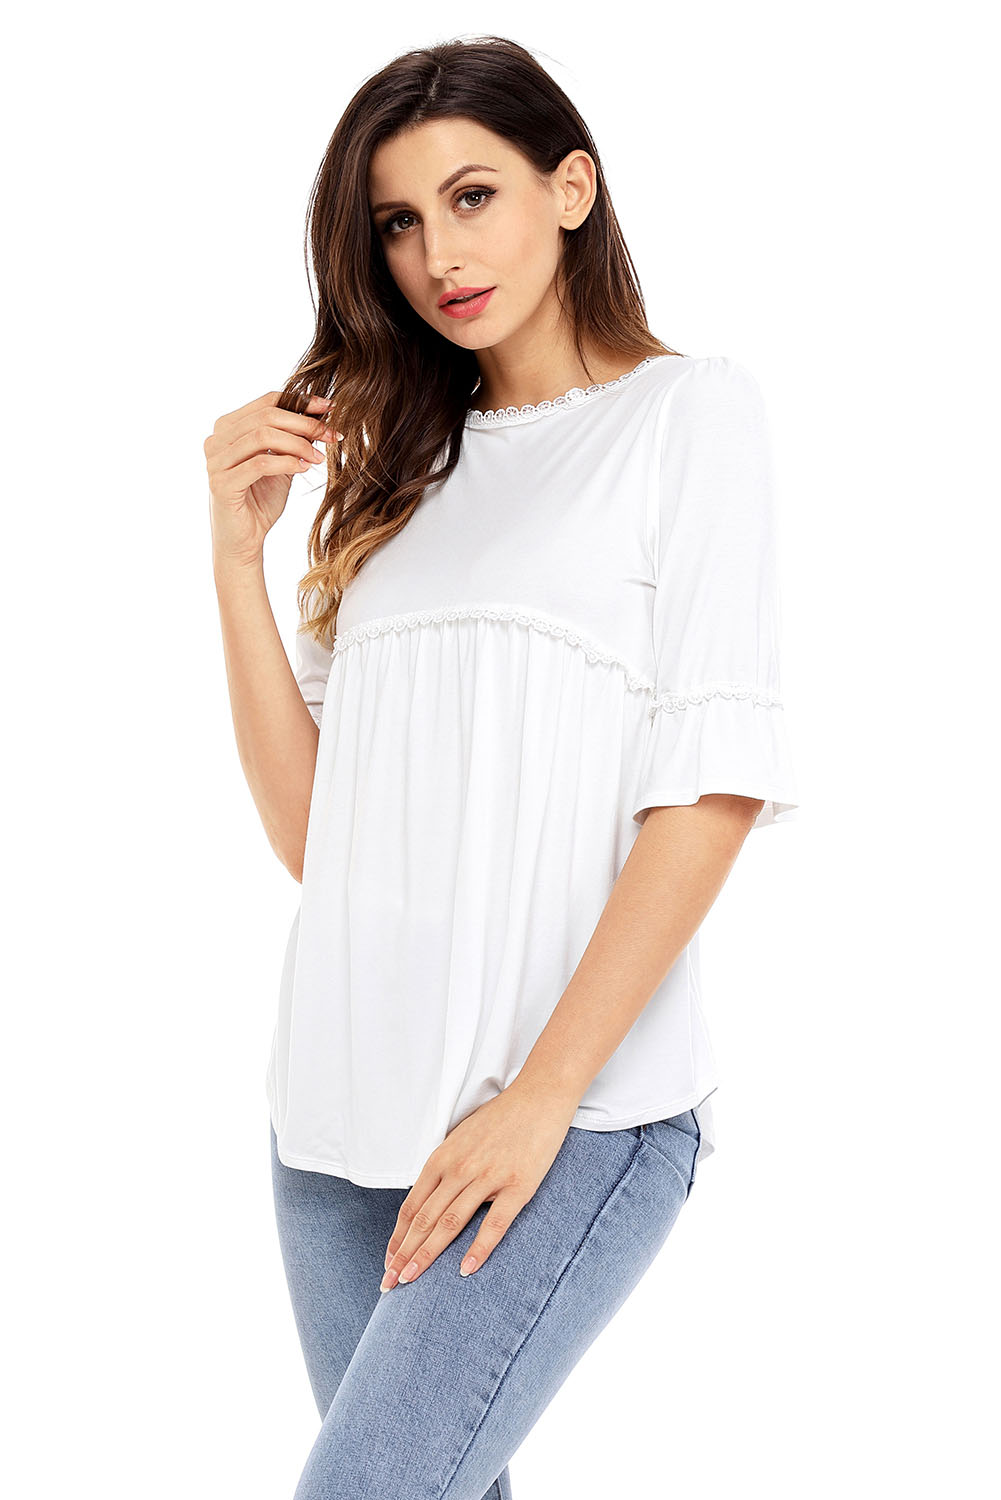 BY250232-1 White Babydoll Long Tunic Top